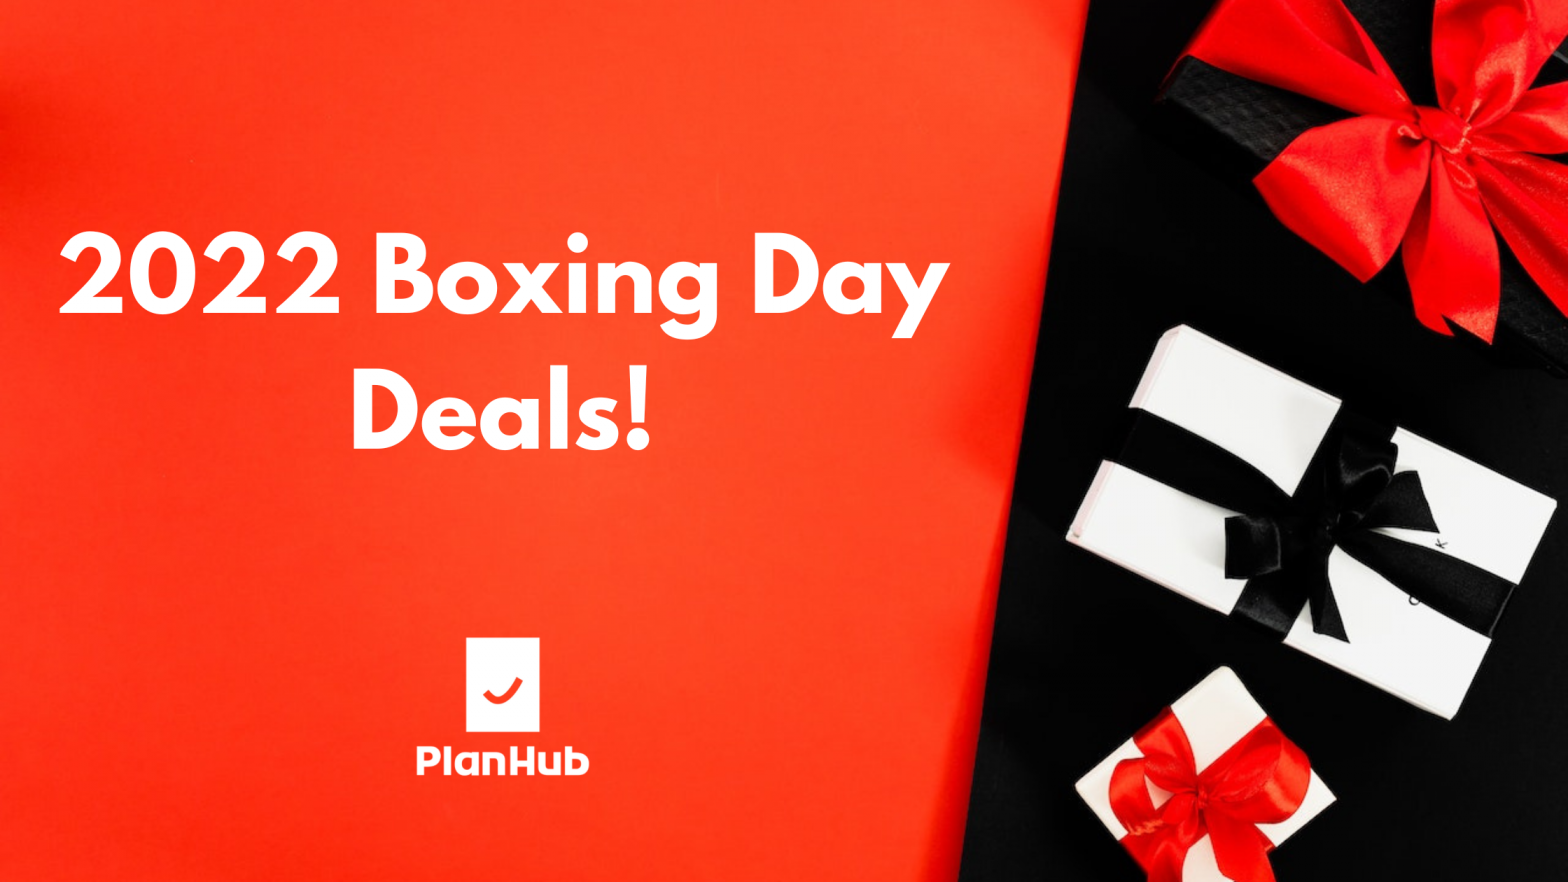 2022 Boxing Day Deals!